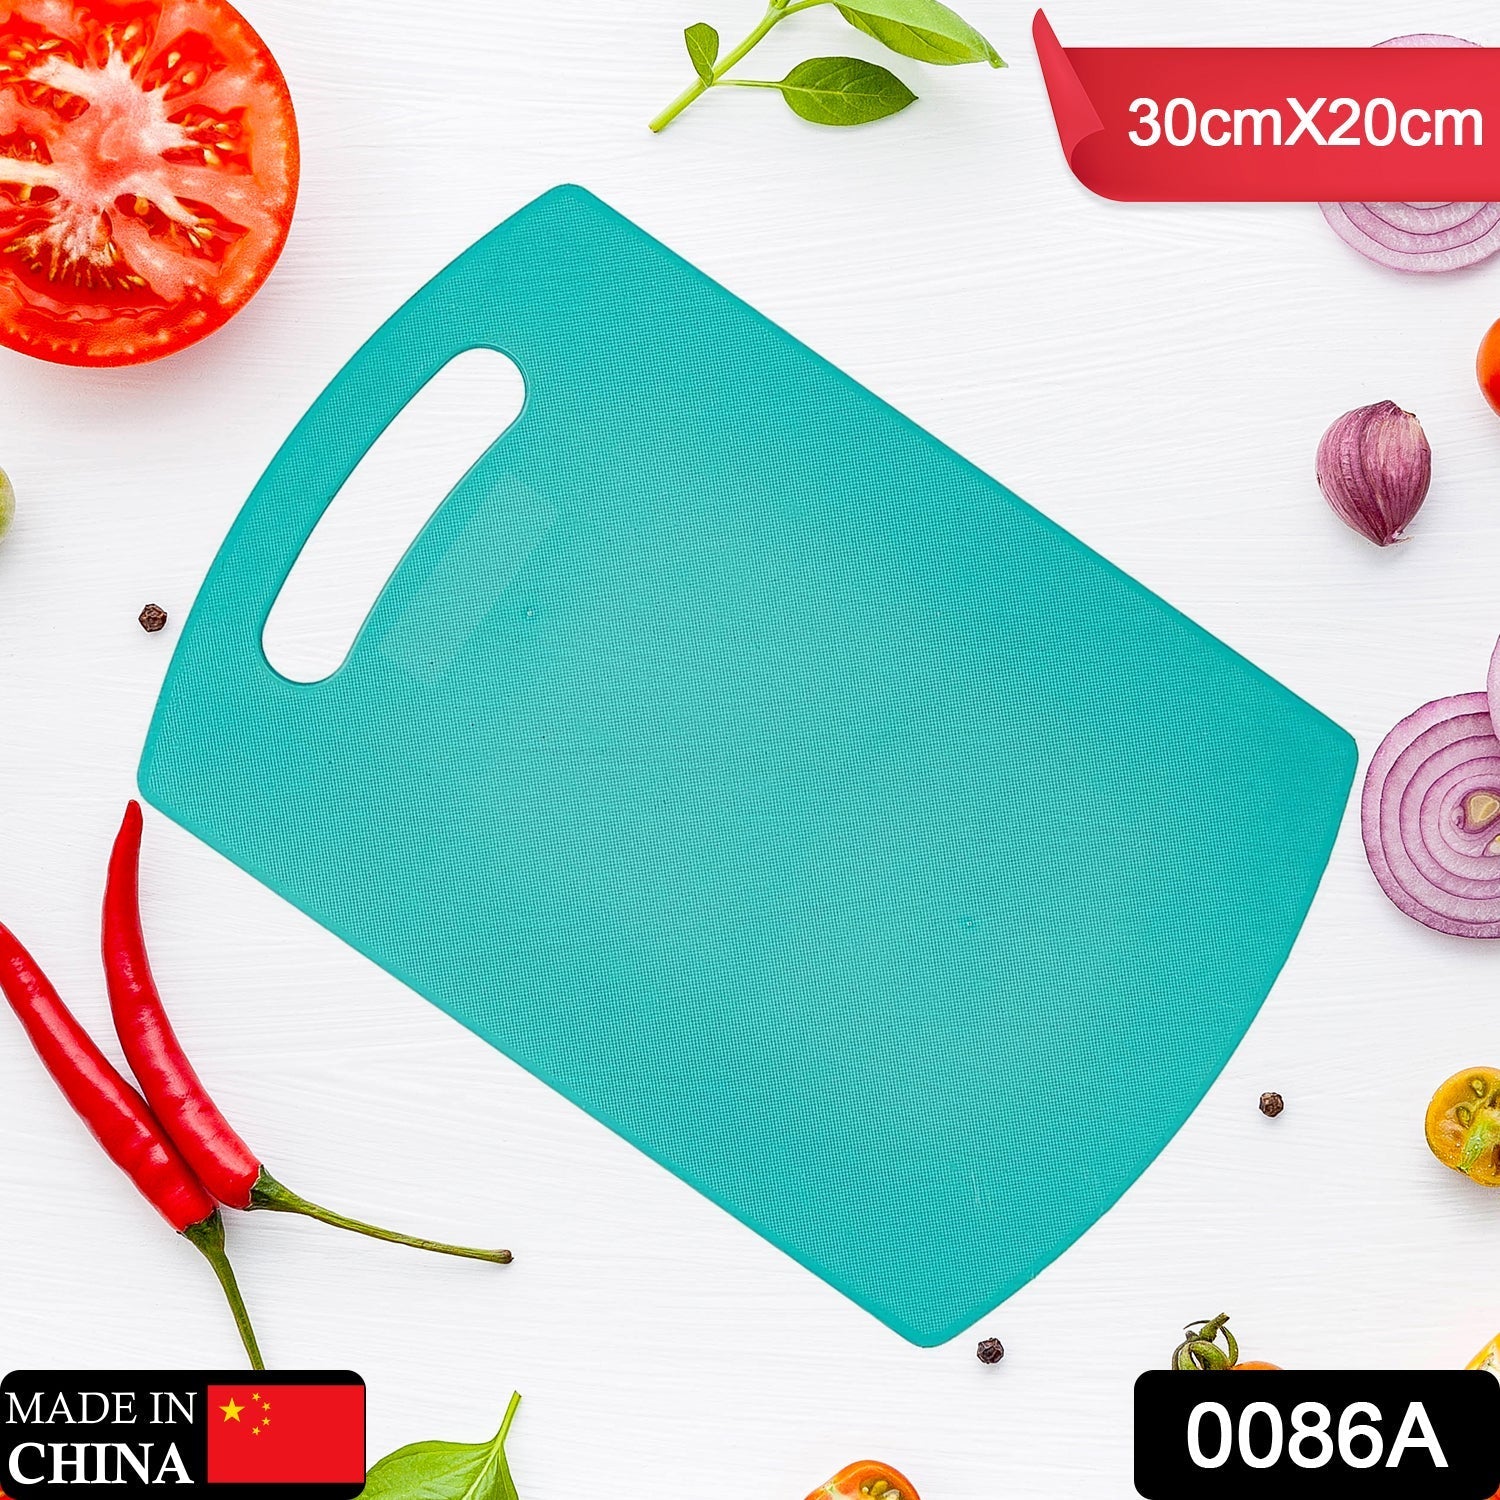 0086A Chopping Board Cutting Pad Plastic for Home and Kitchen Accessories Items Tools Gadgets for Cutting Vegetables Non Sleep Anti Skid 